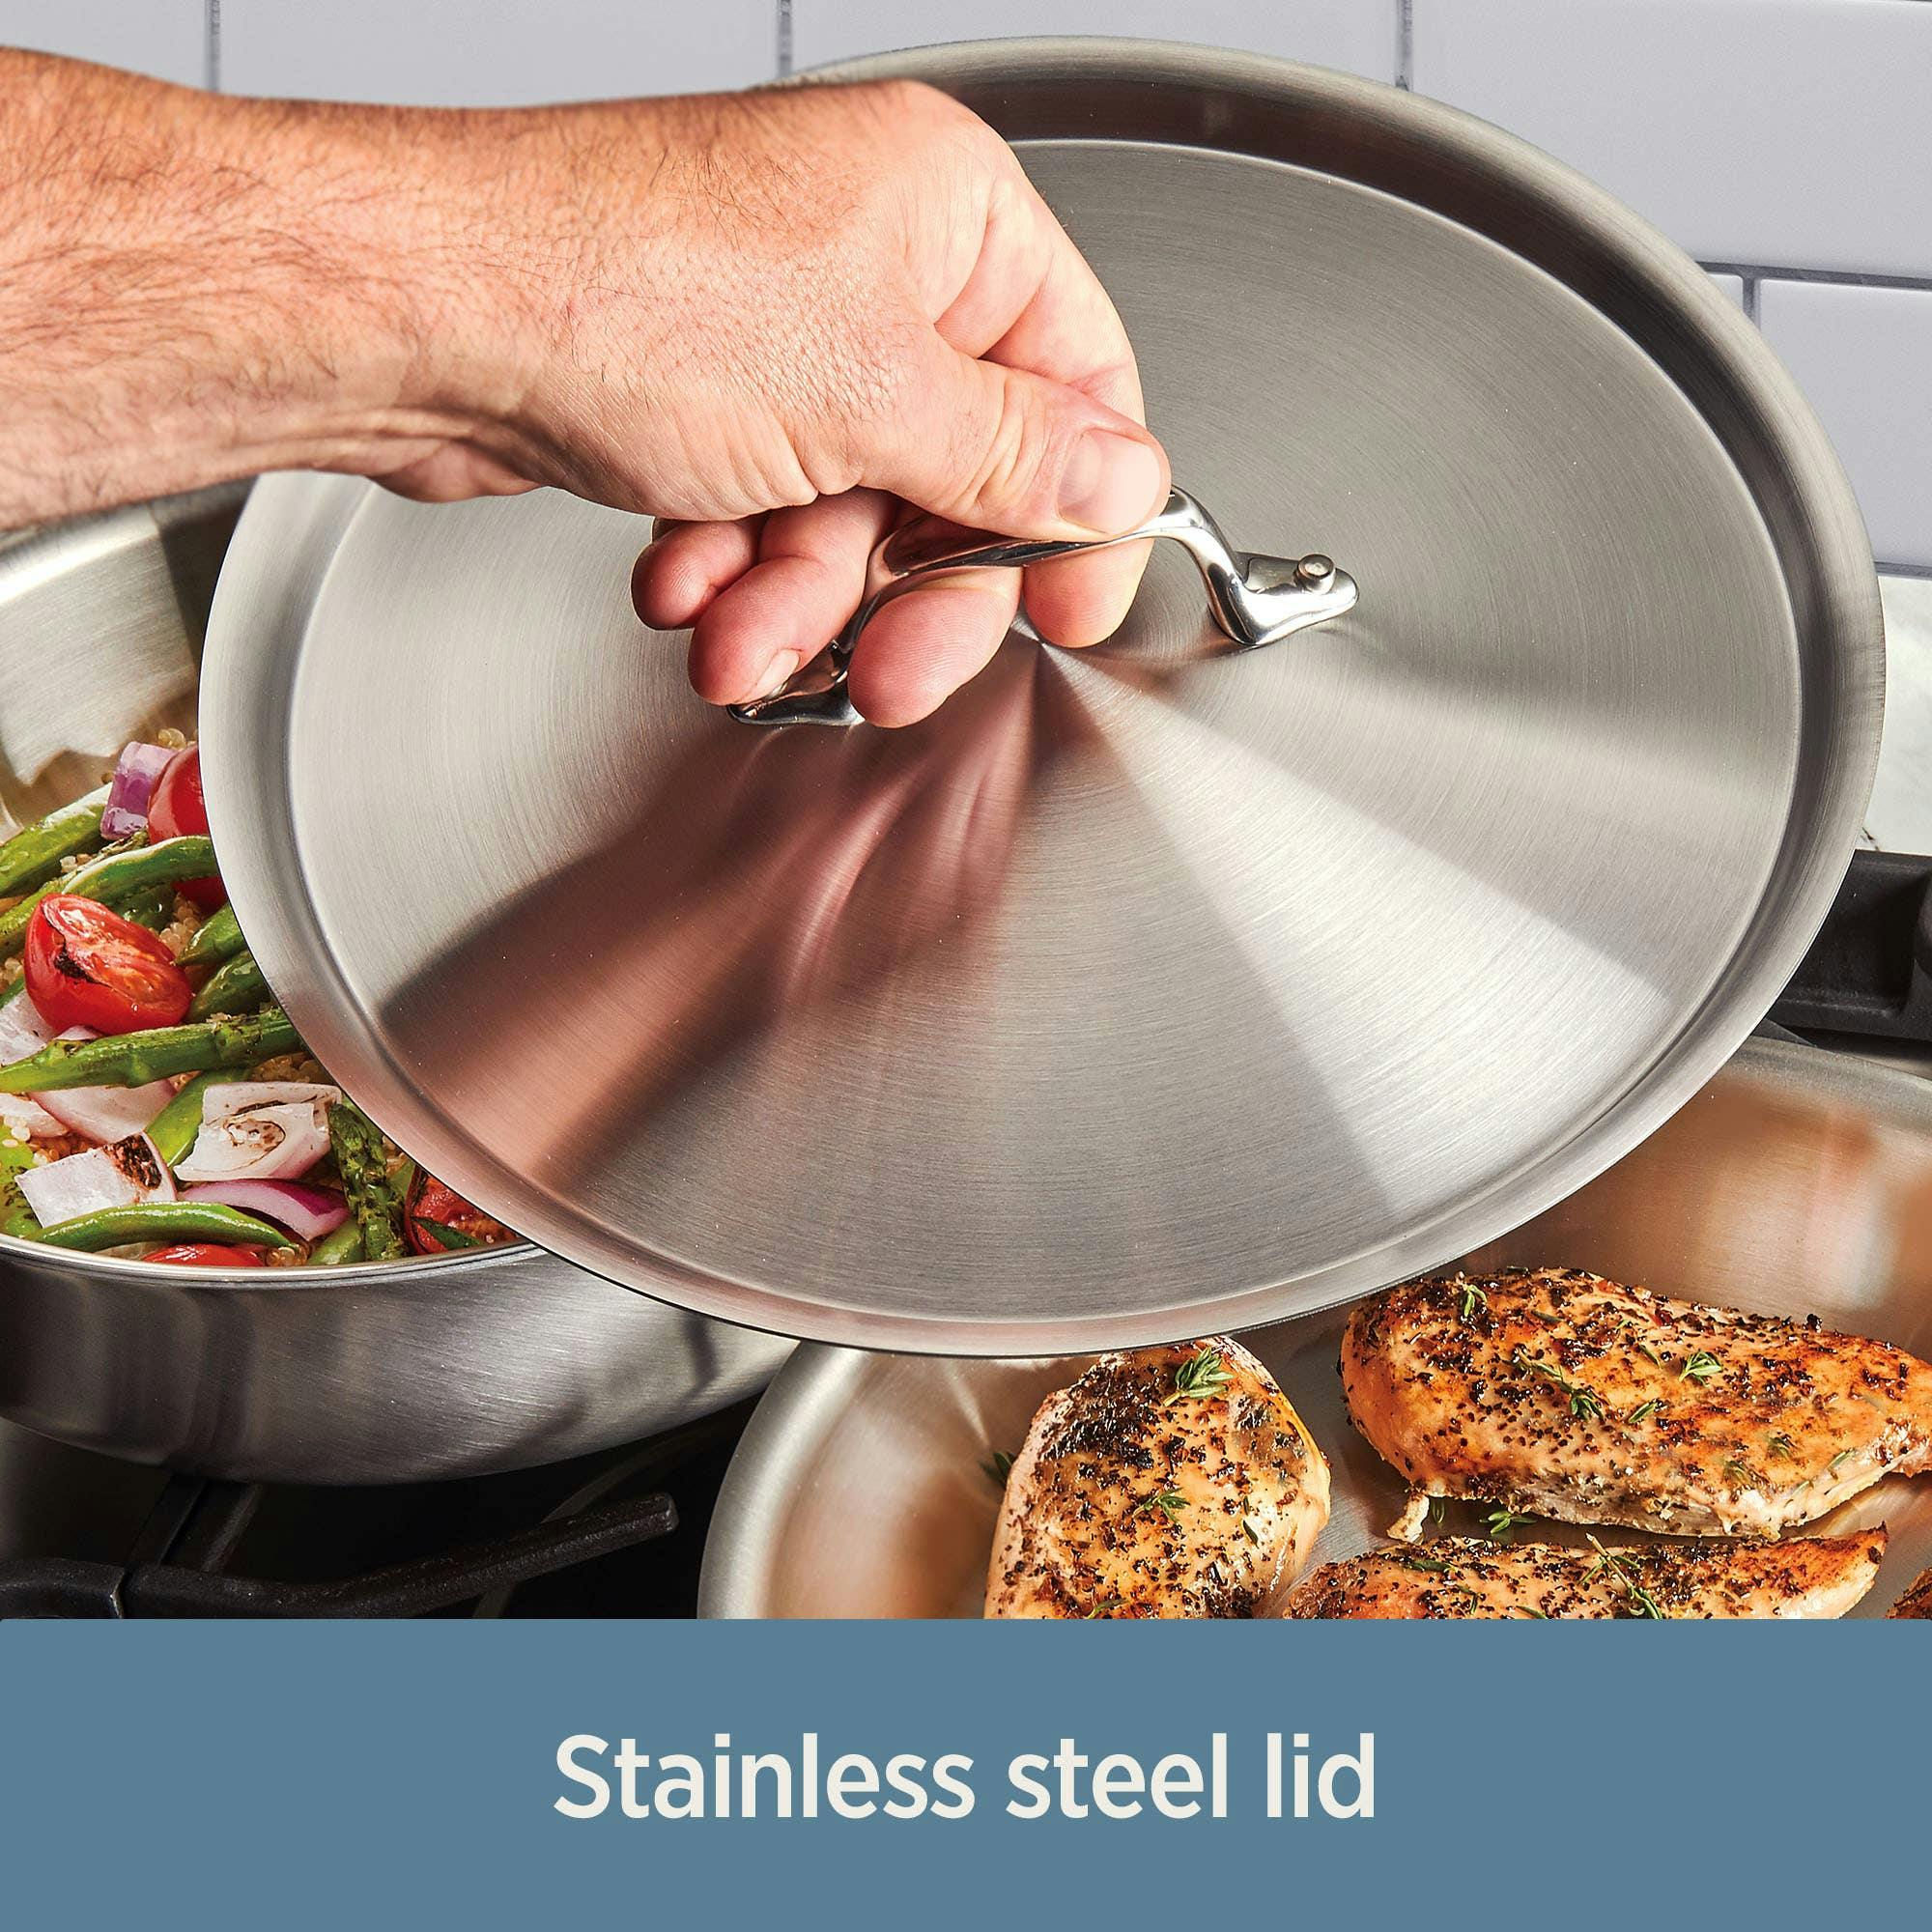 10.5 Inch Stainless Steel Skillet, D3 3-Ply Cookware